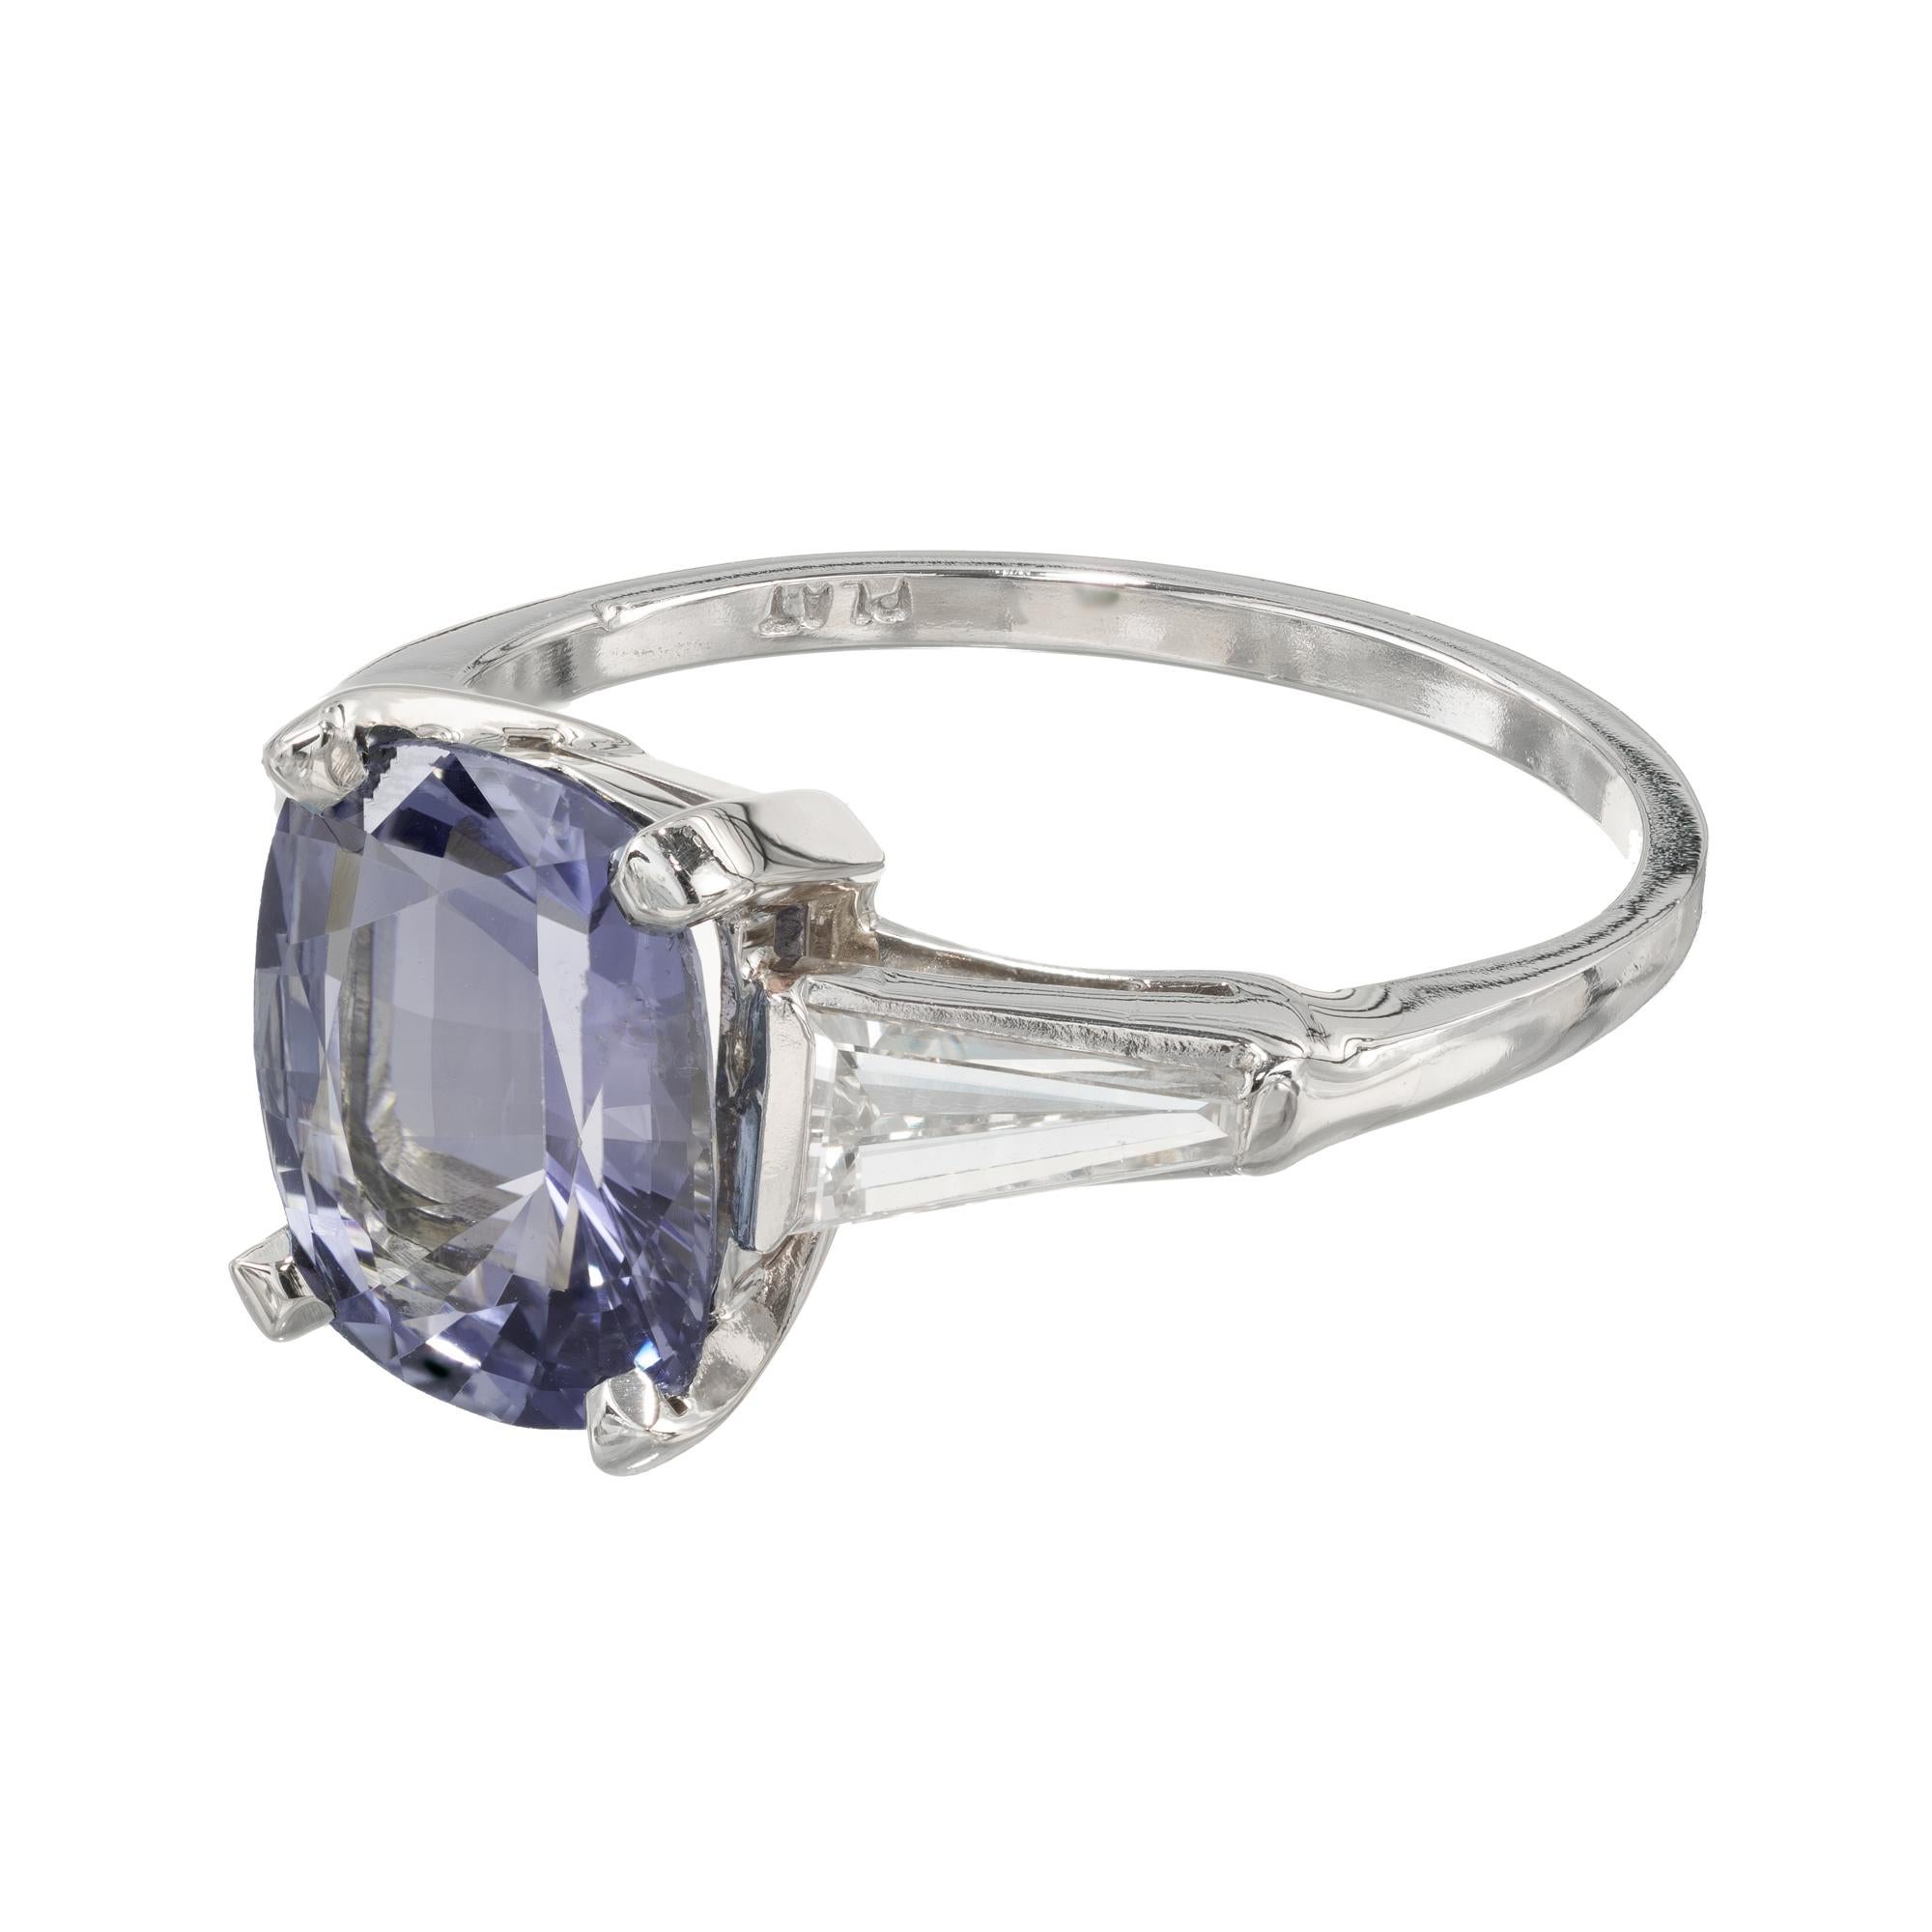 Oval Cut GIA Certified 3.06 Carat Ceylon Oval Sapphire Diamond Platinum Engagement Ring For Sale